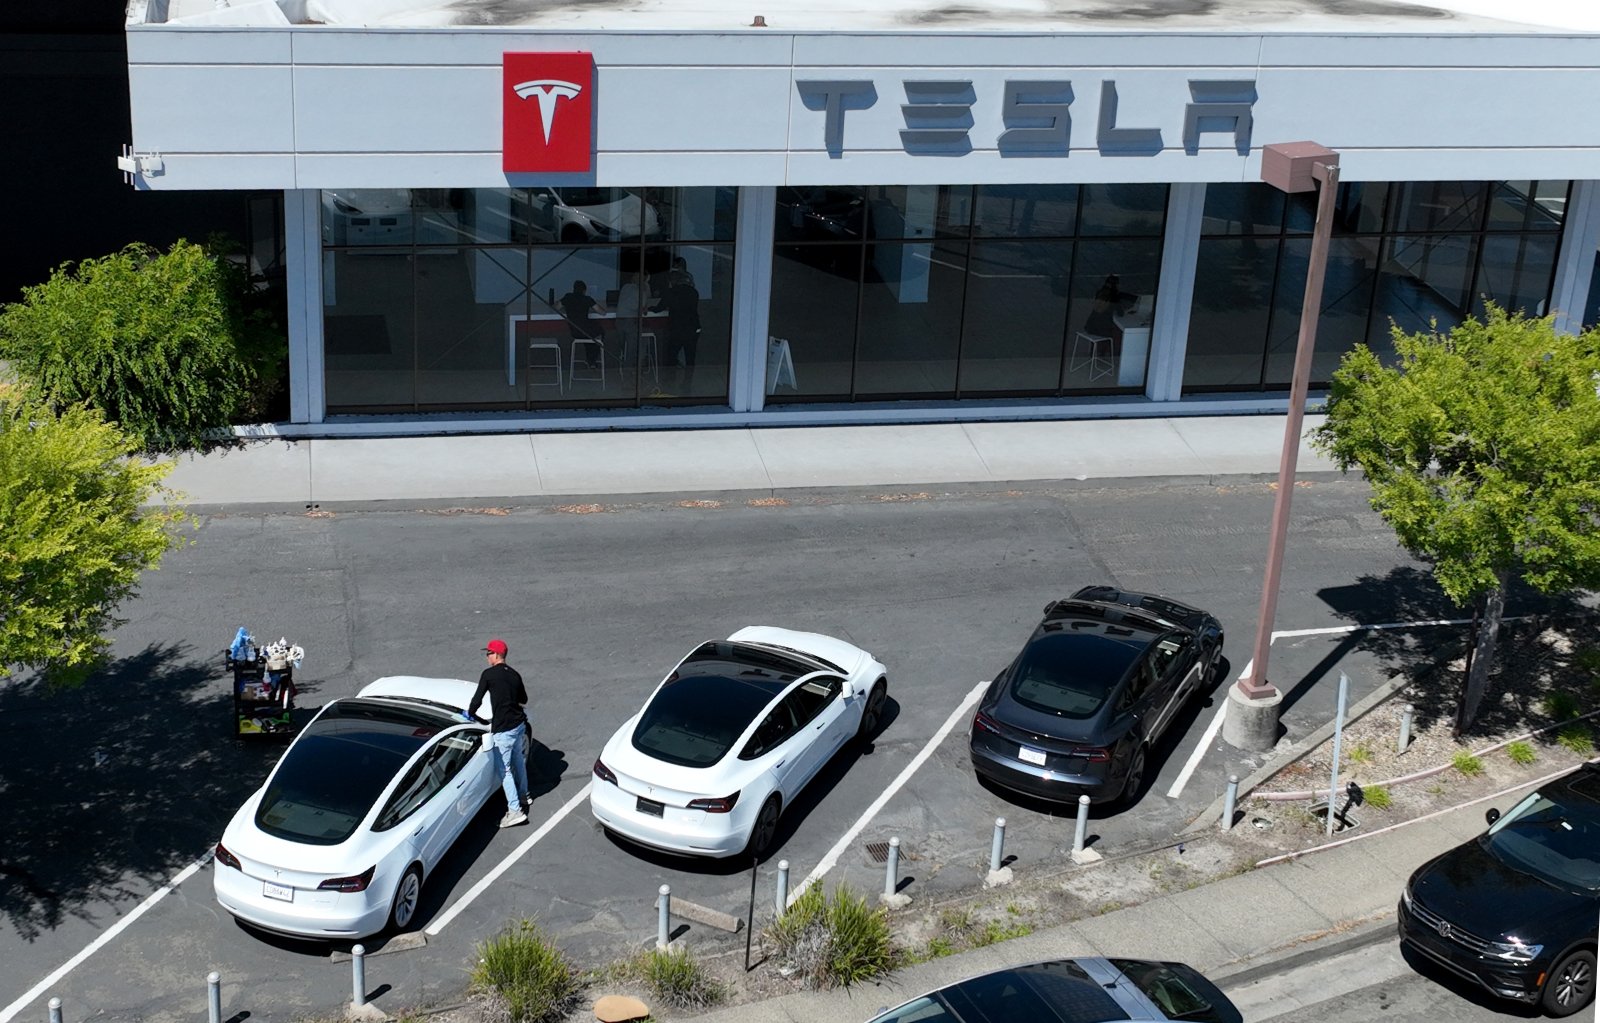 Tesla Is No Longer Alone in the Electric Vehicle Race